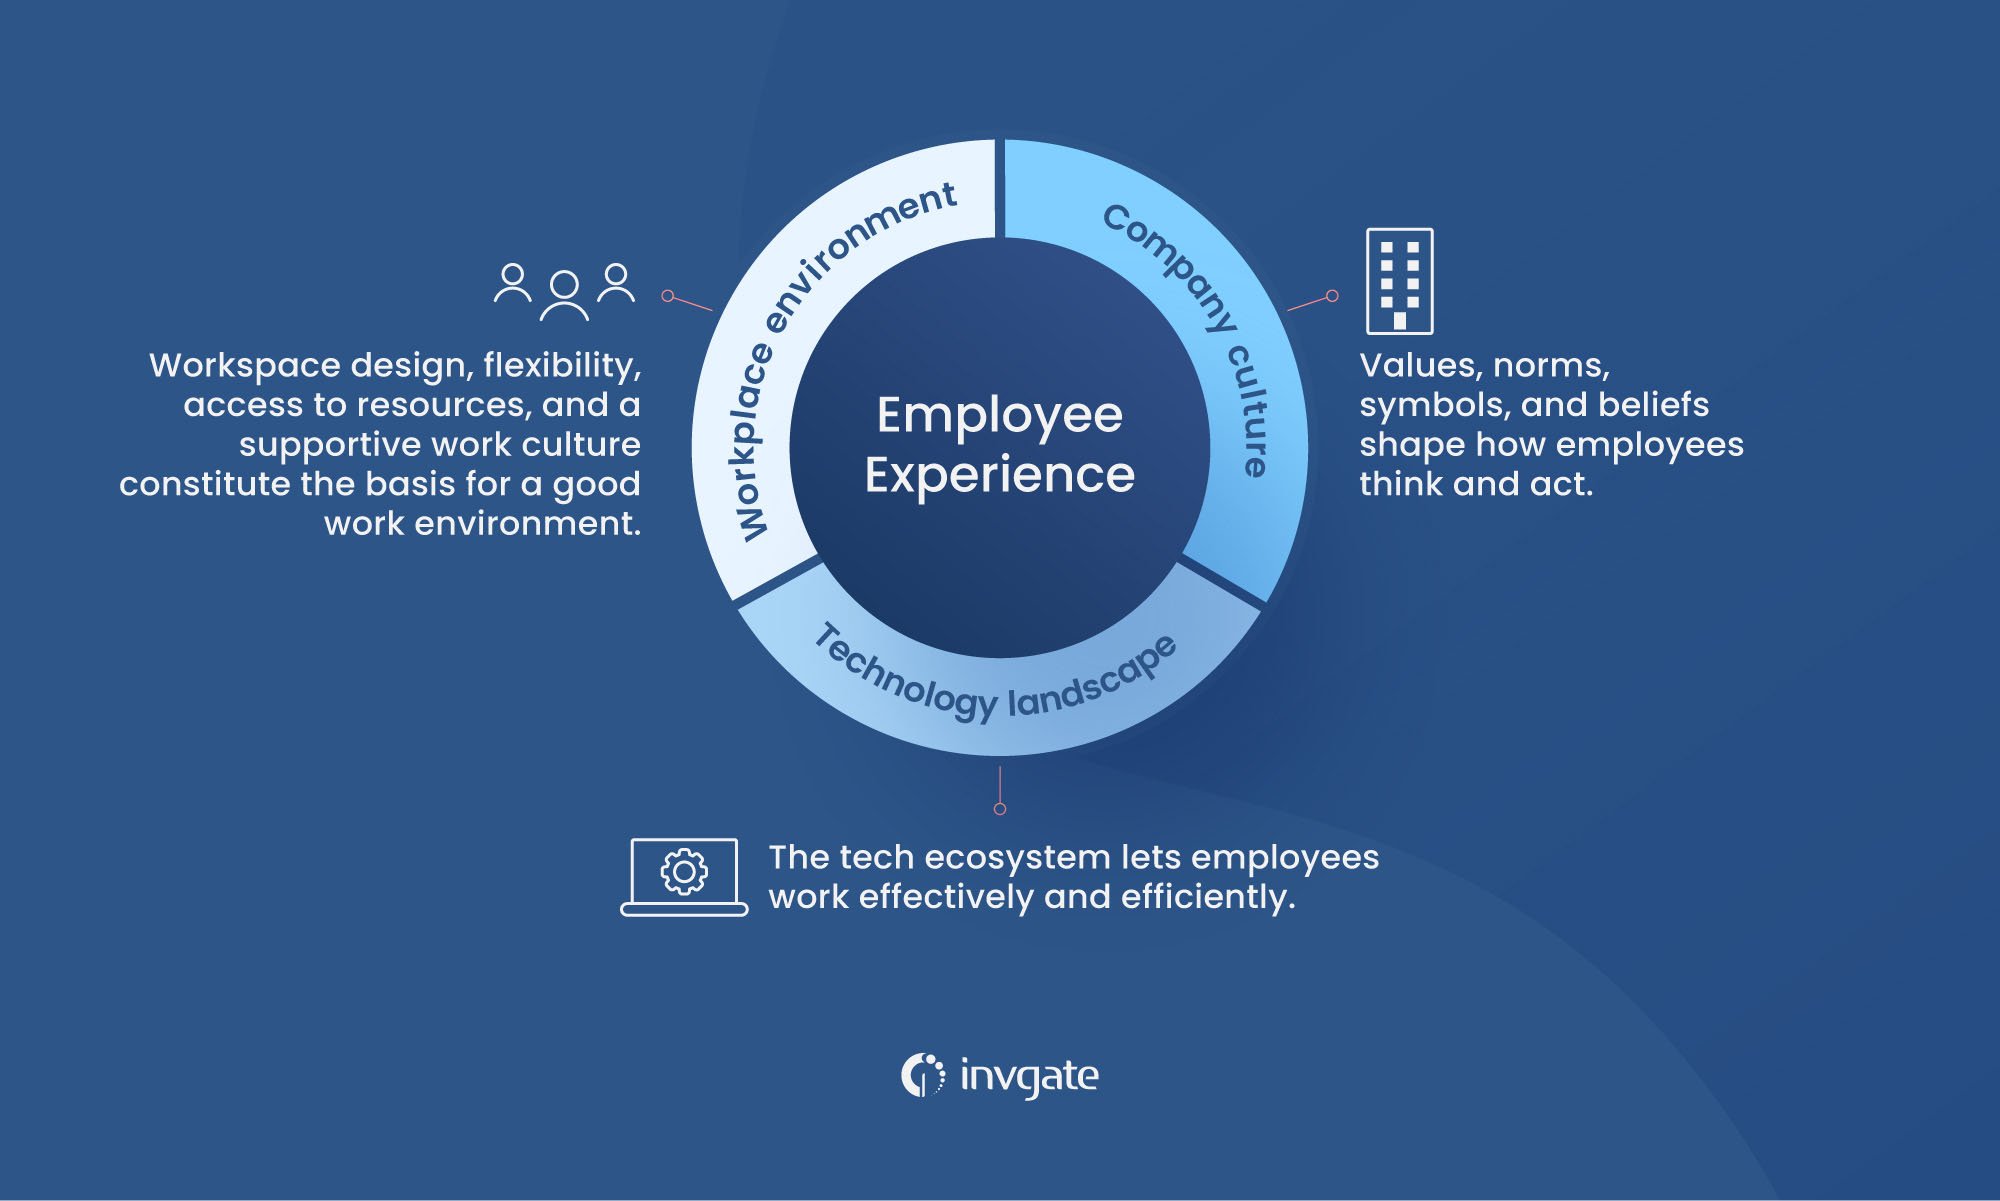 The three key factors contributing to an employee's experience: company culture, technology, and engagement. 